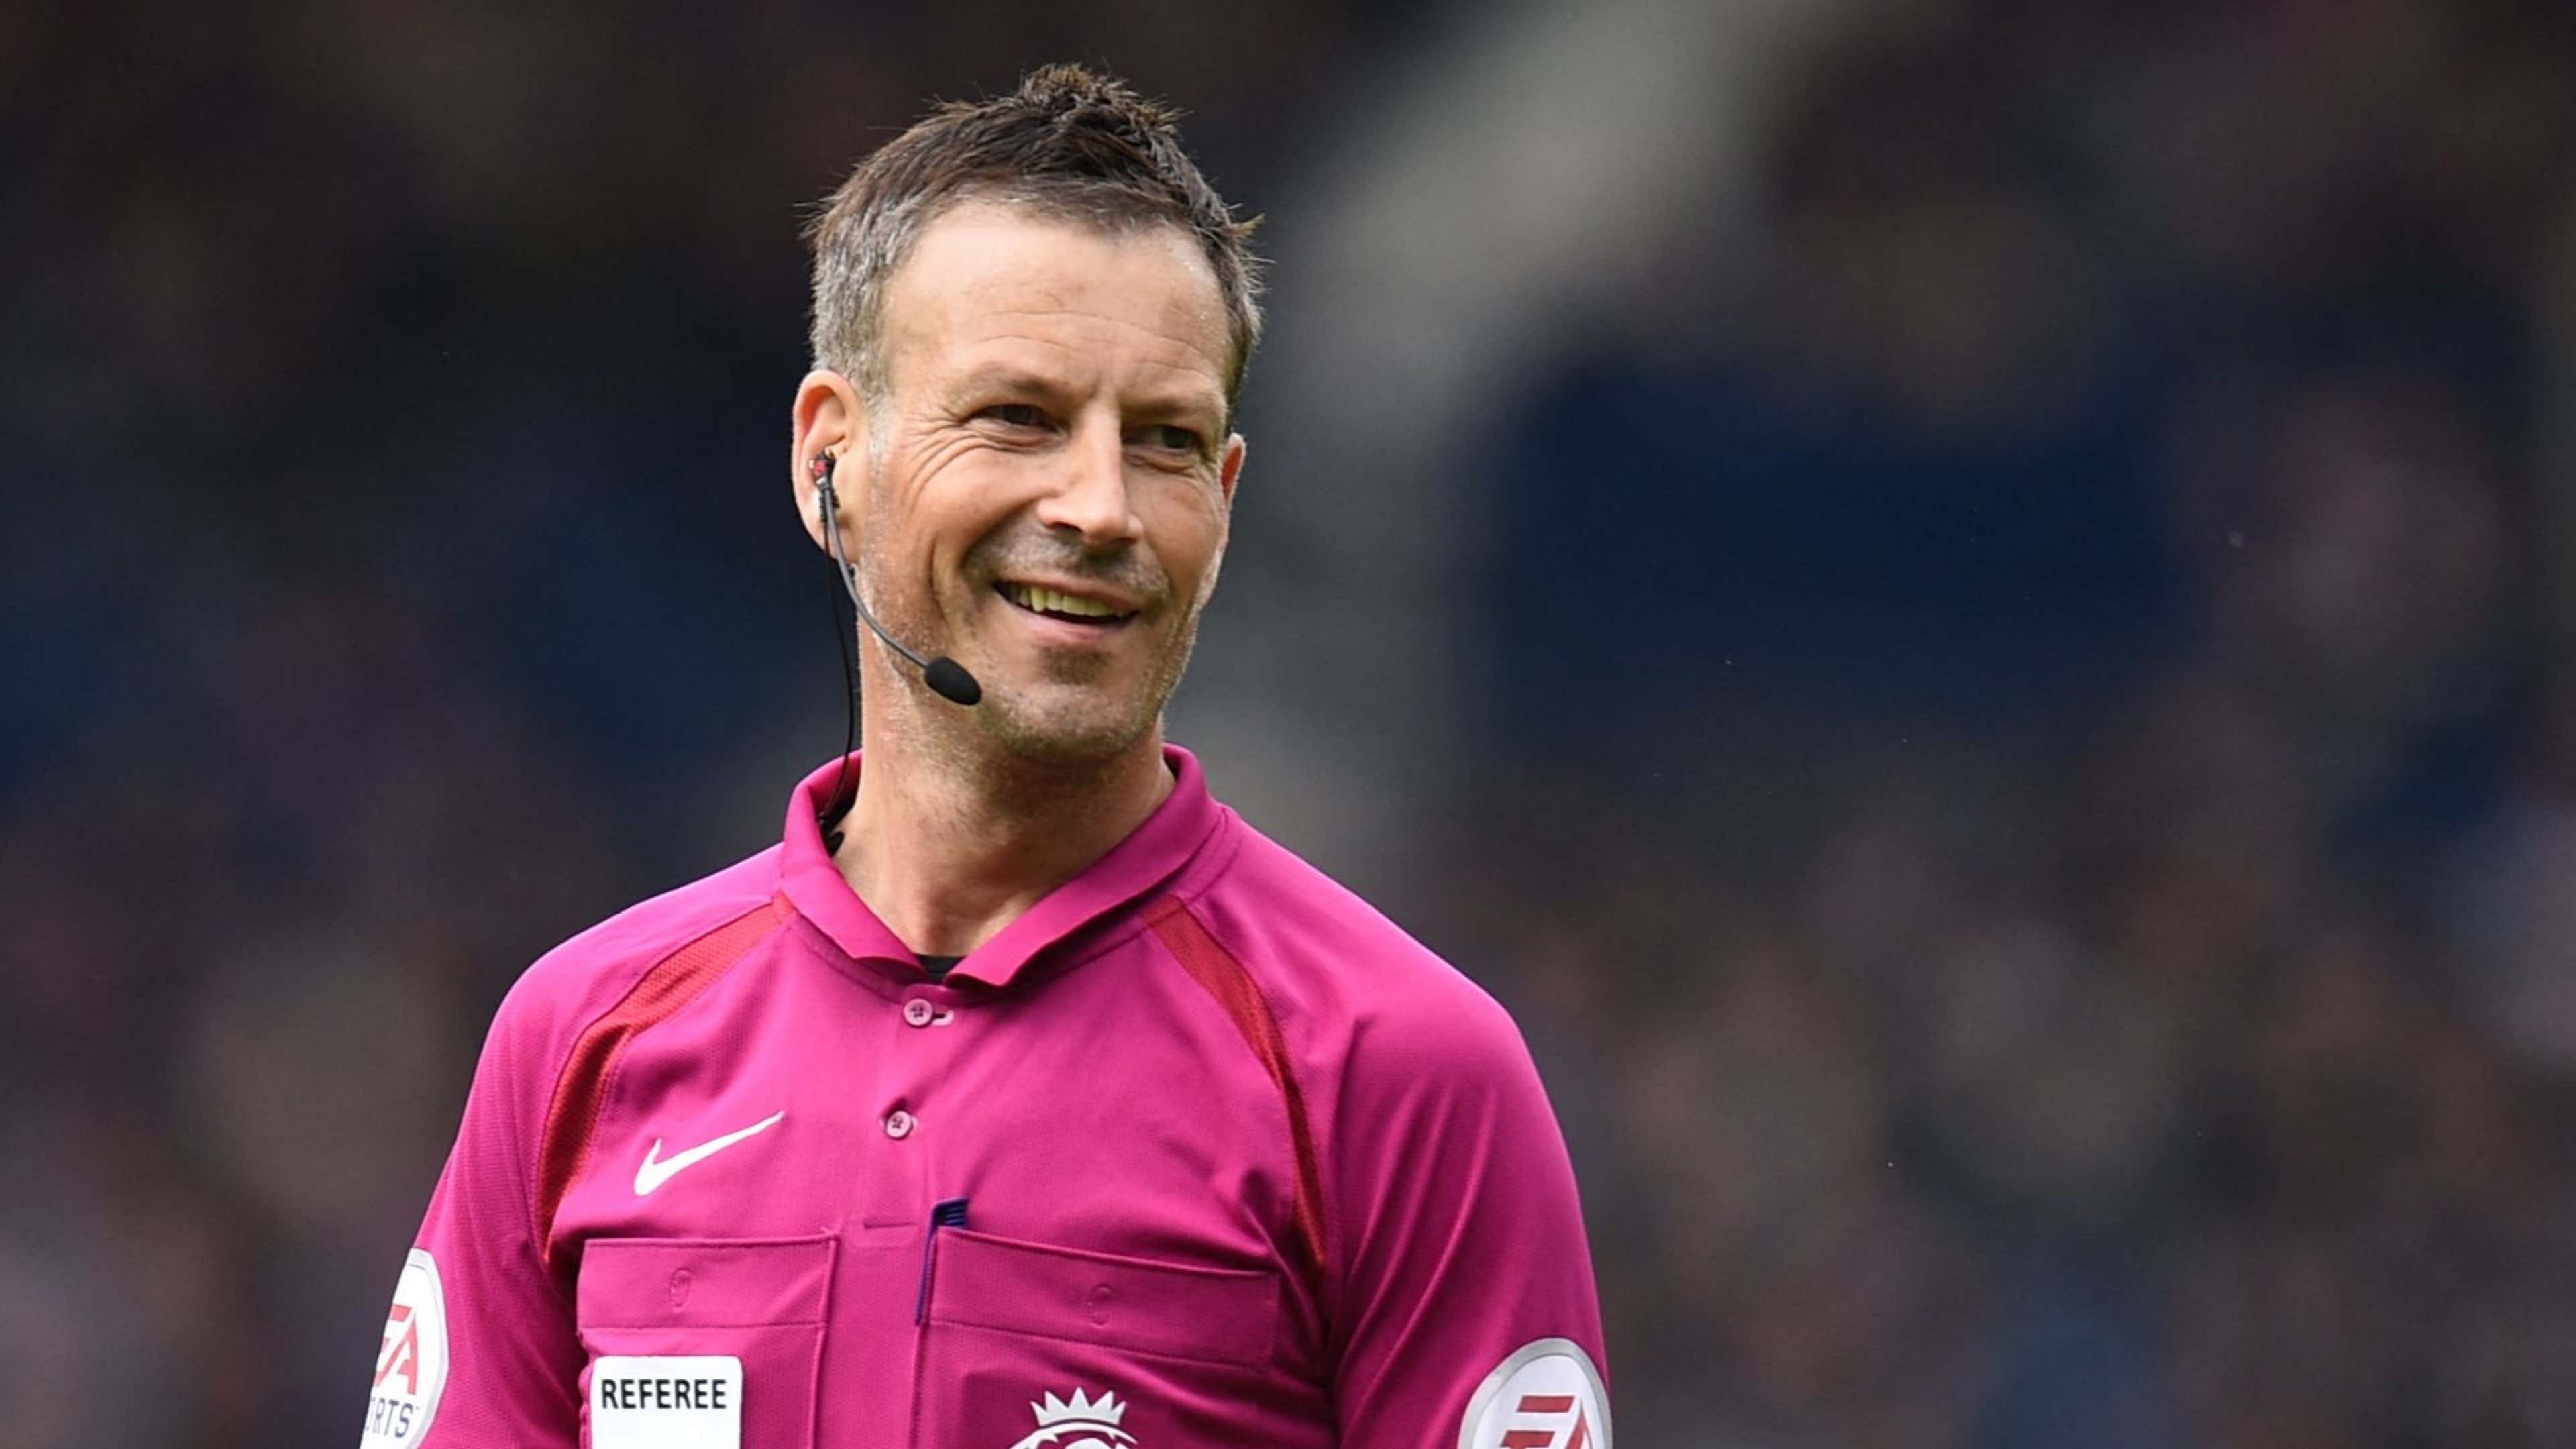 Football history made as referee Clattenburg has yellow card Uno reversed  in brilliant Sidemen charity match moment